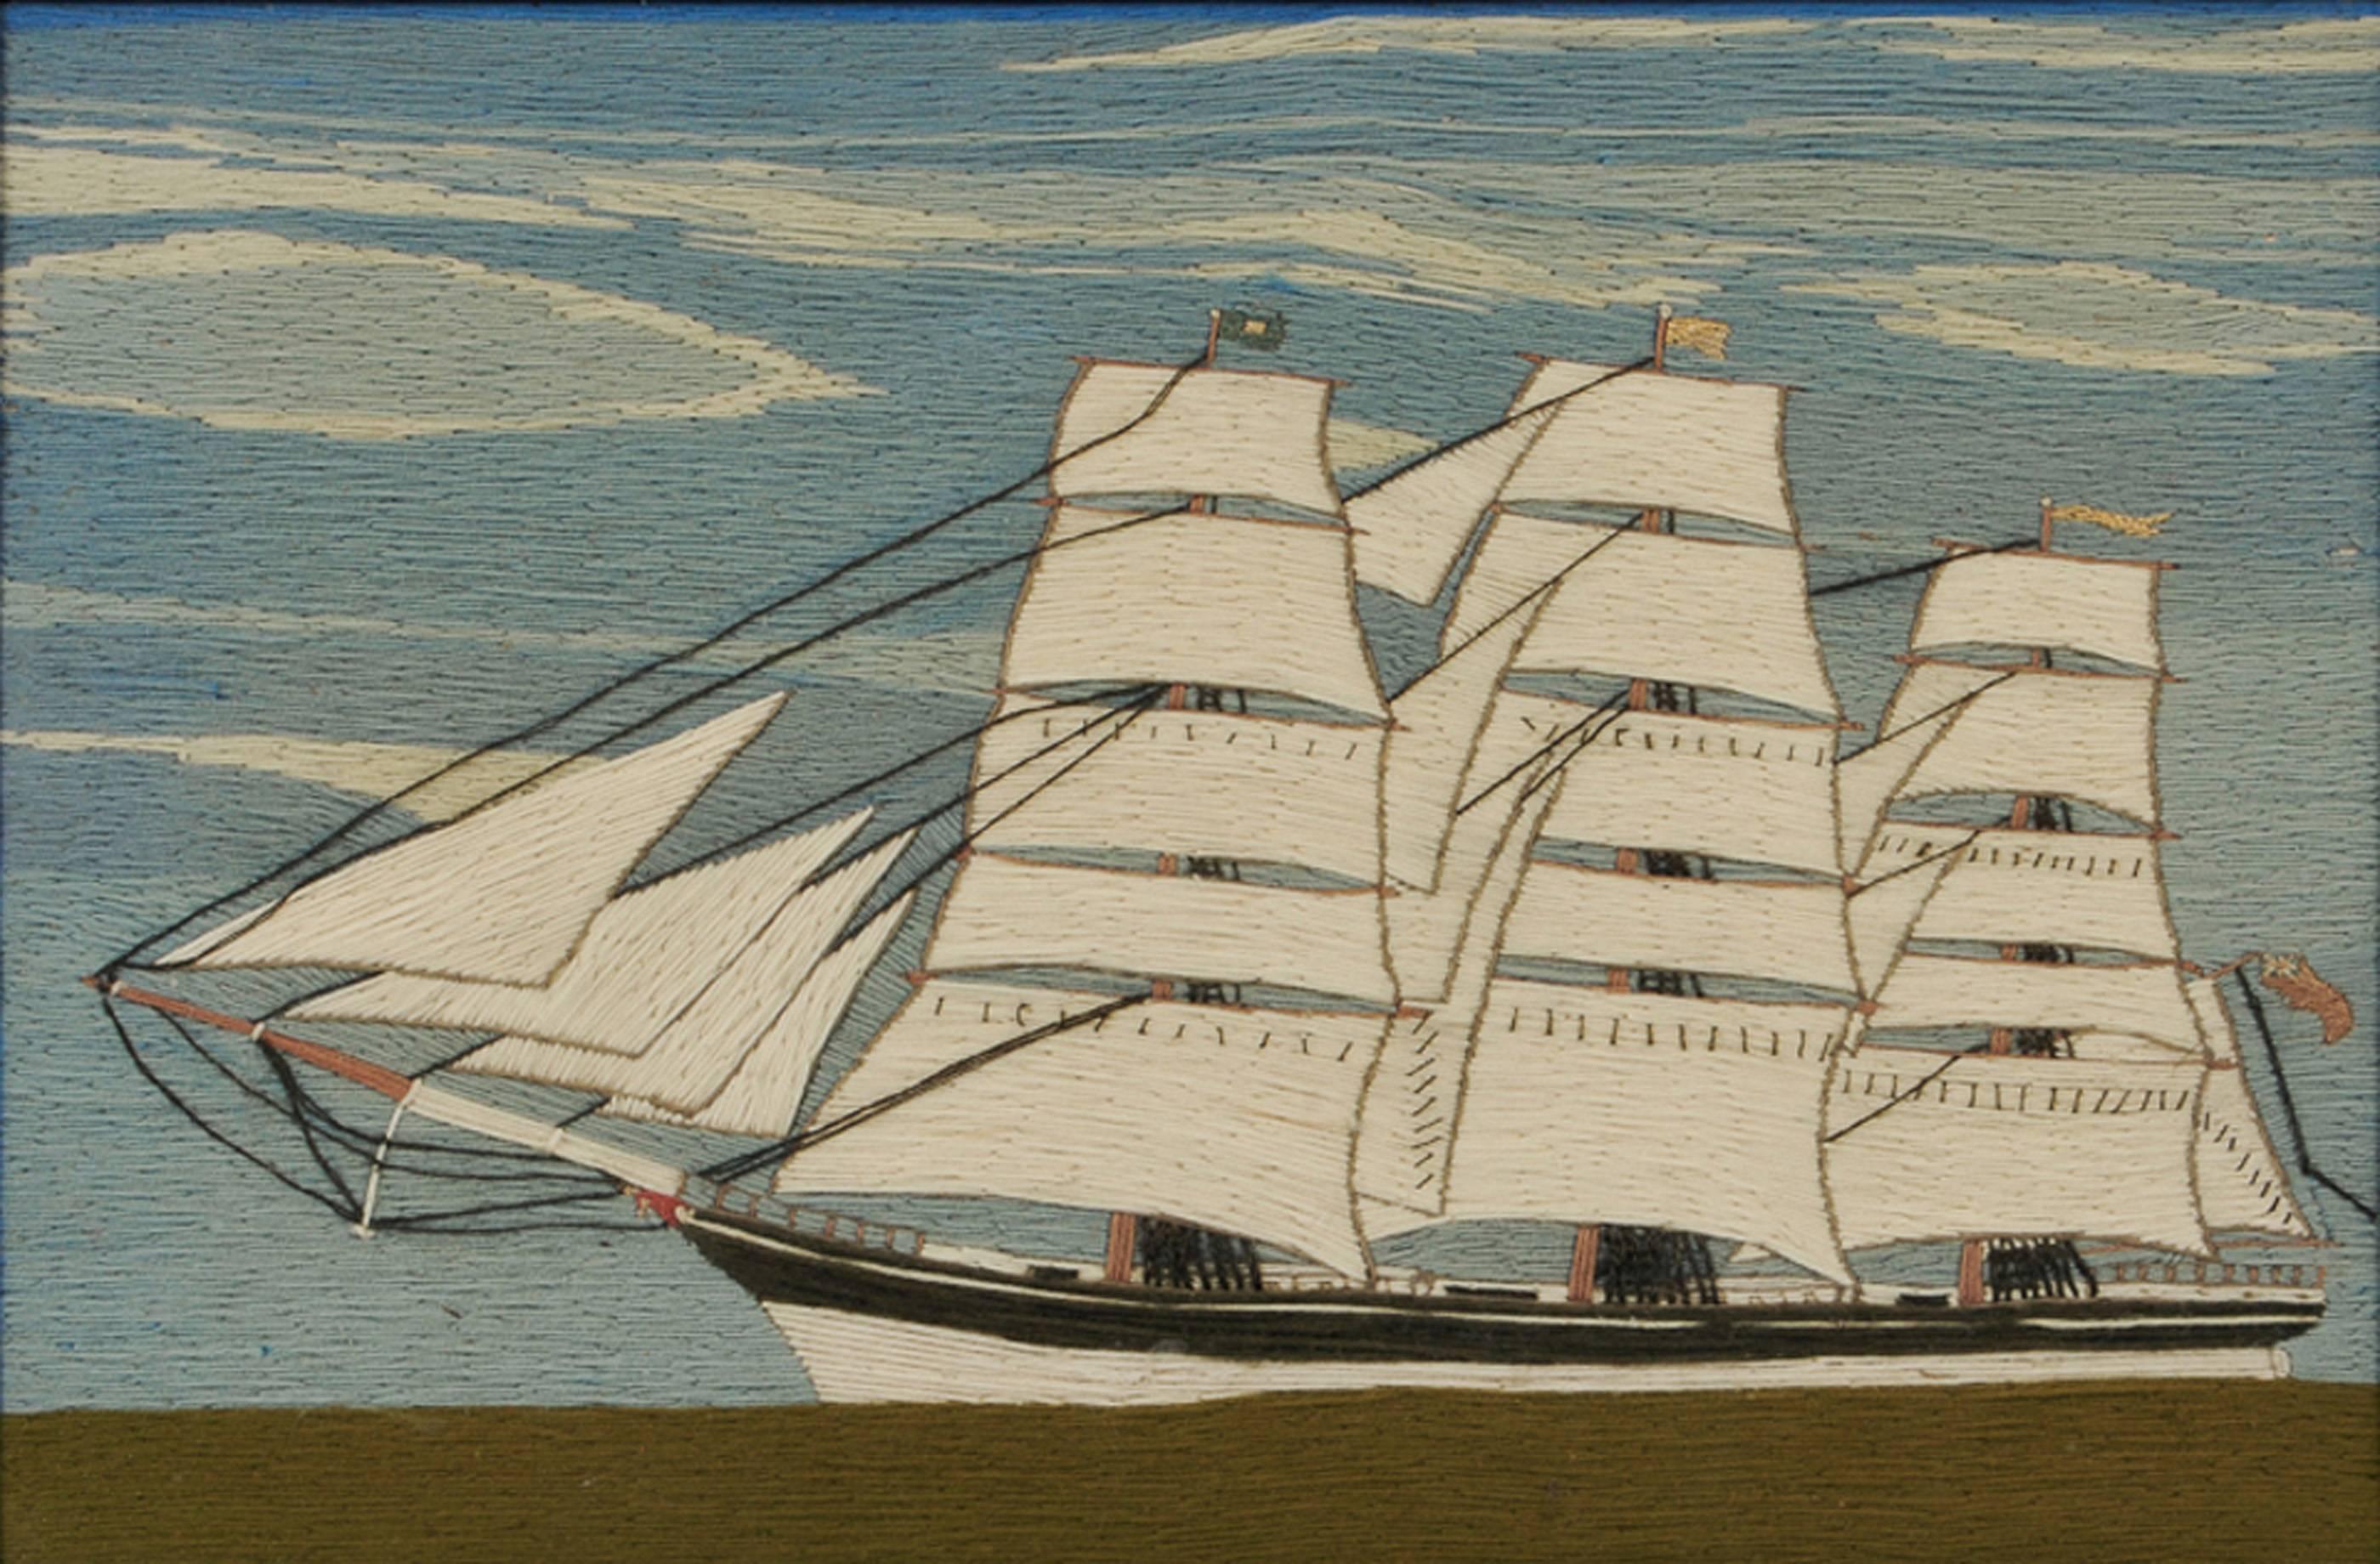 British sailor's woolwork of a merchant navy ship,
circa 1865-1885.

The sailor's woolie in a maple frame depicts a portside view of a three-masted merchant navy ship in full sail on an unusual green sea with a white hull against a good sky still